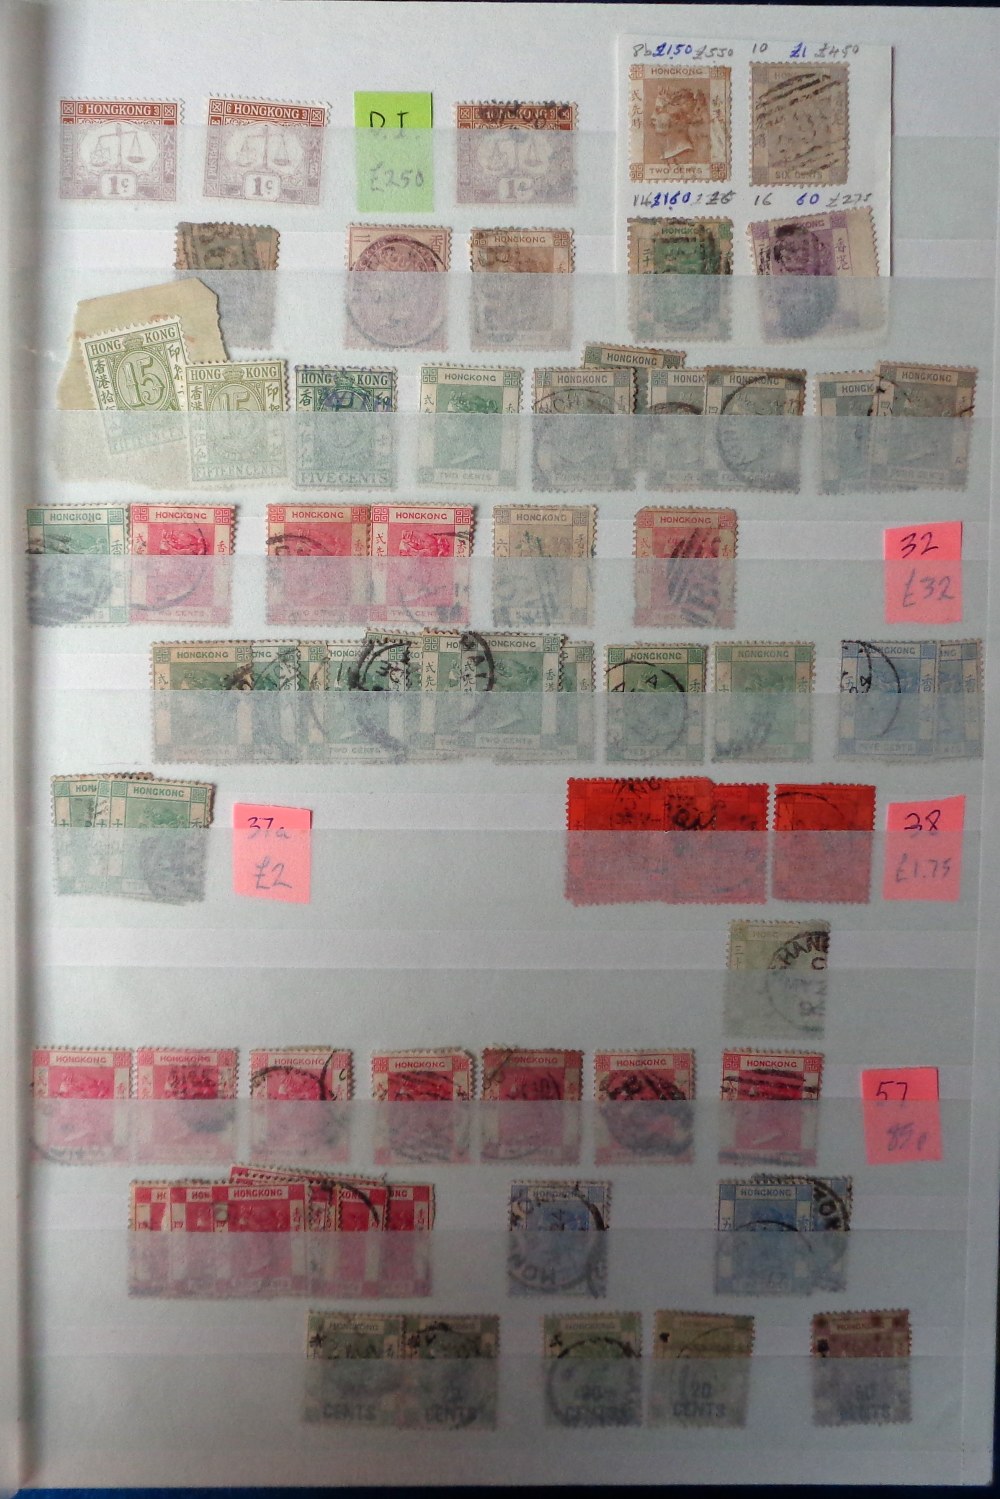 Stamps, Retired dealer's collection housed in 64 side stockbook to include Hong Kong and